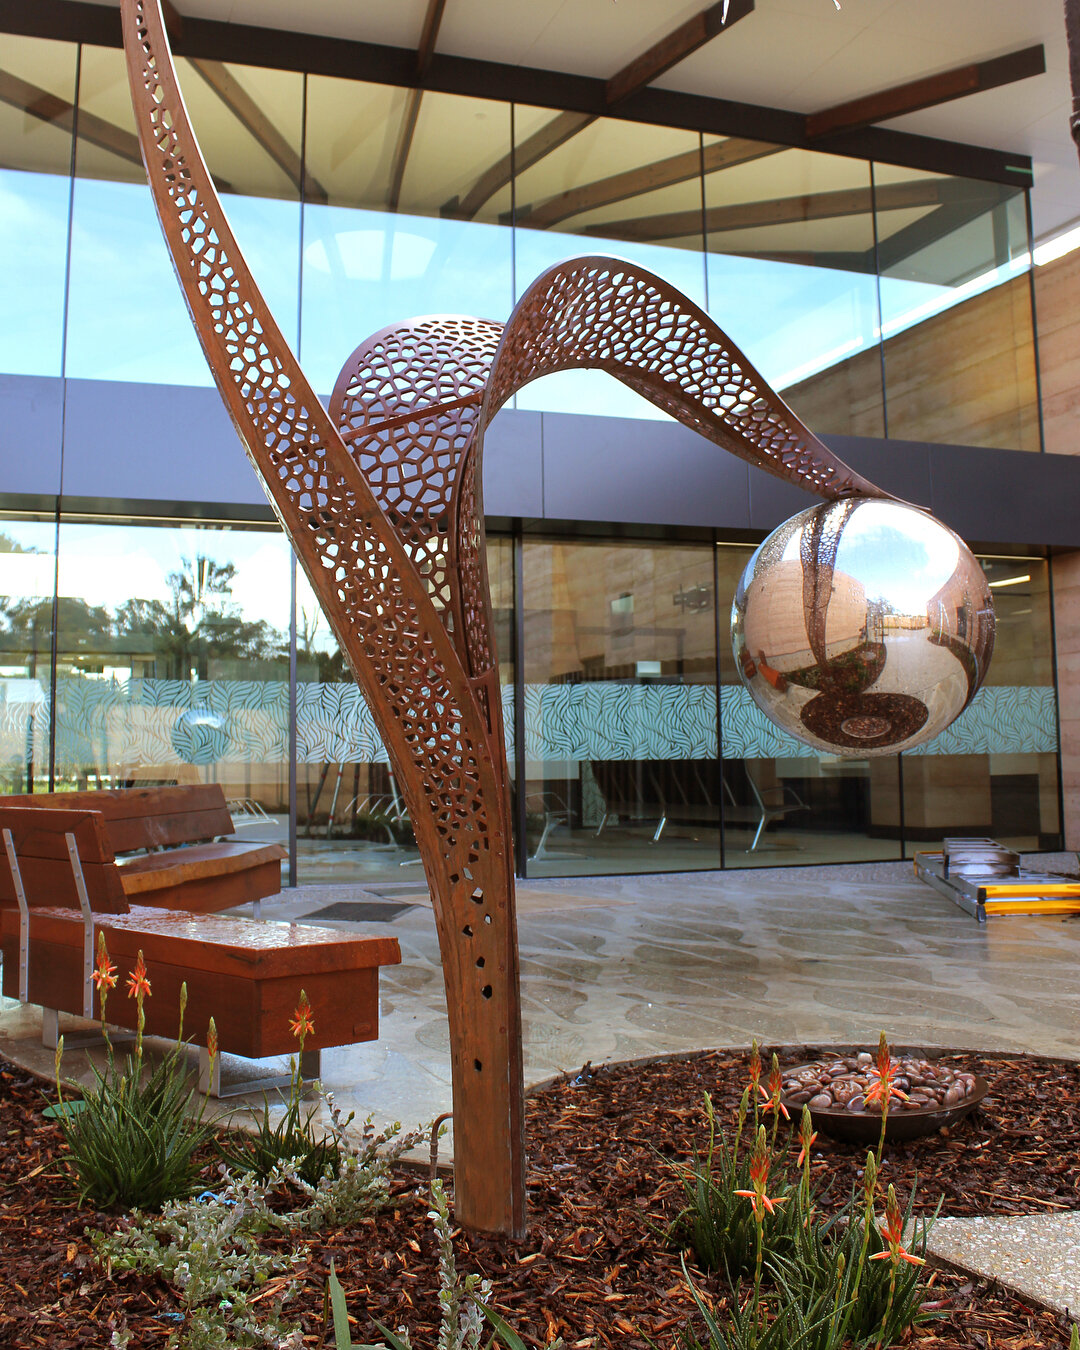 This week the new Warren Health Campus opened in Manjimup, WA. I&rsquo;m happy to share the first of two freestanding sculptures @adamcruickshankdesignermaker and I created for the new complex. Moments Suspended, 2018. Copper, polished Stainless Stee